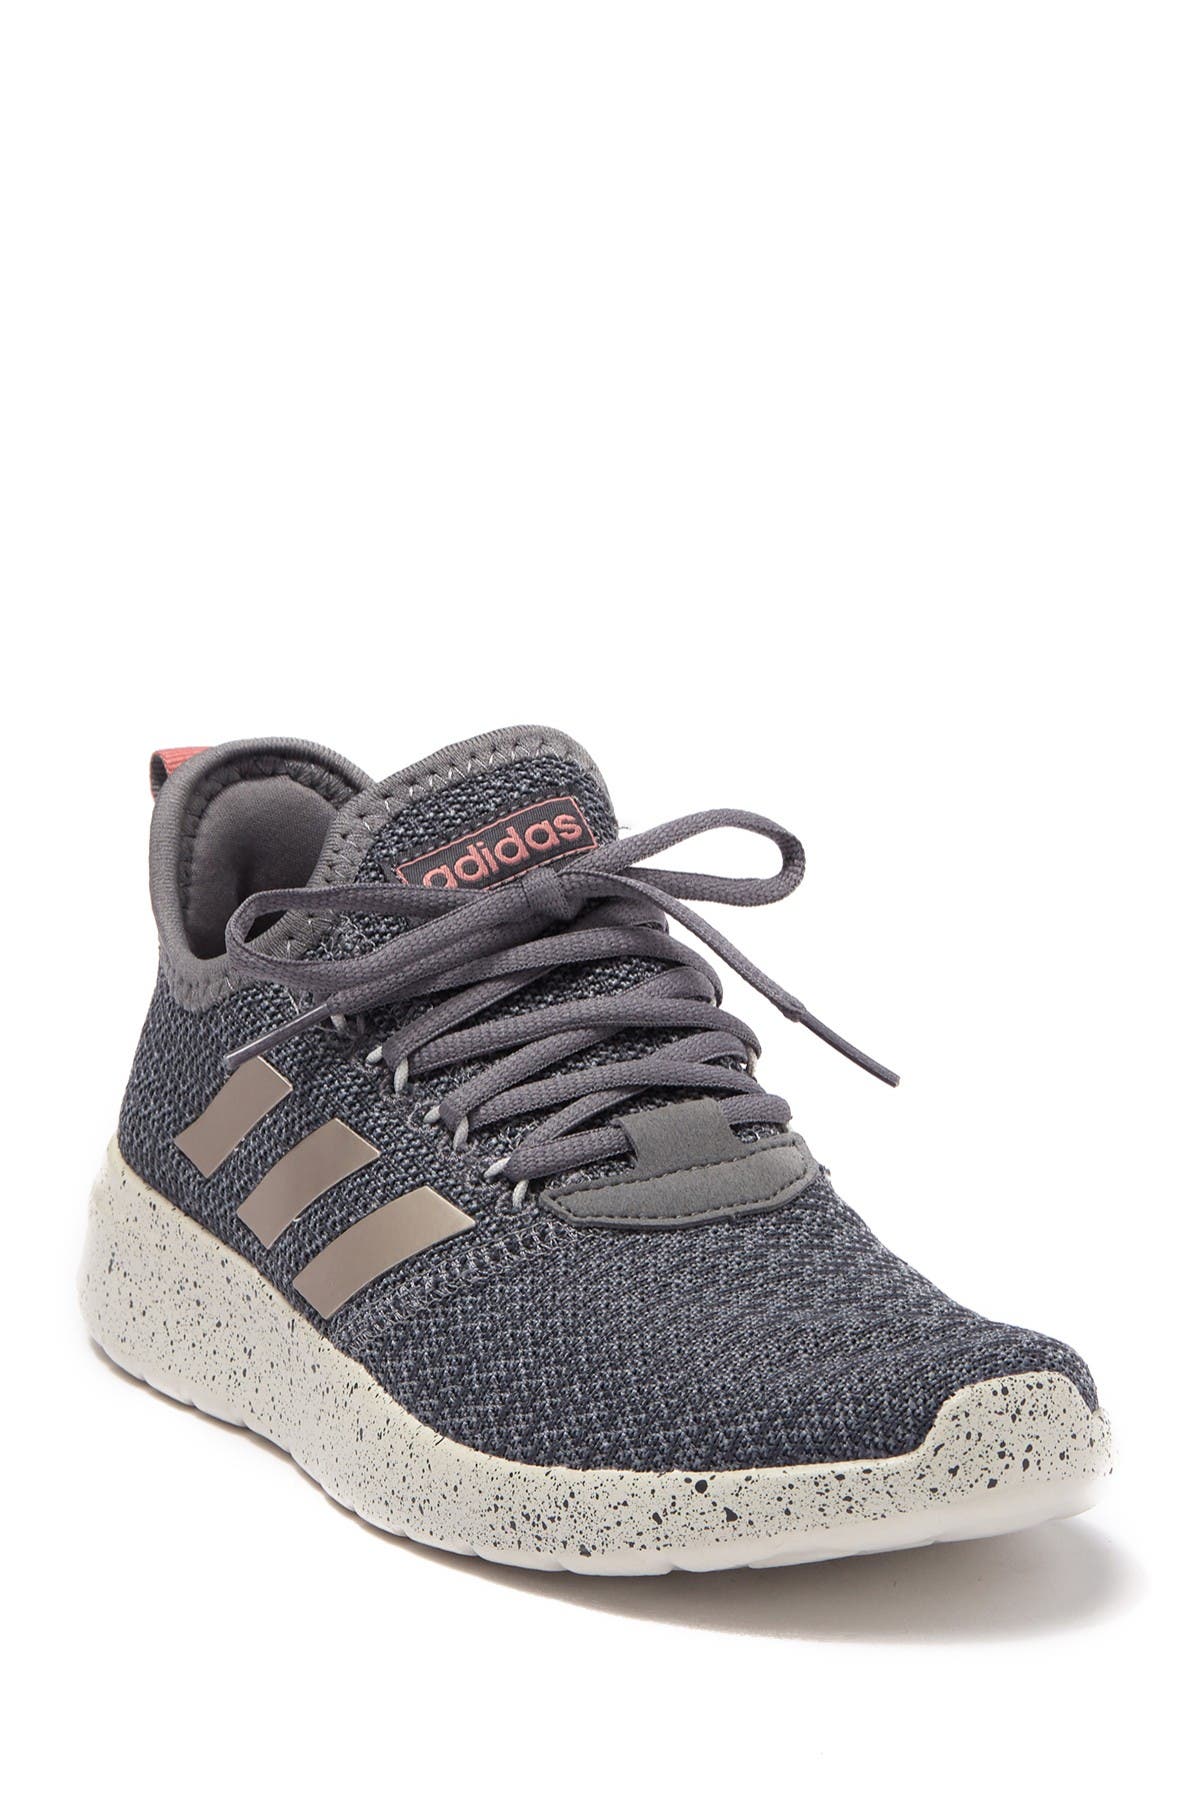 lite racer rbn shoes grey